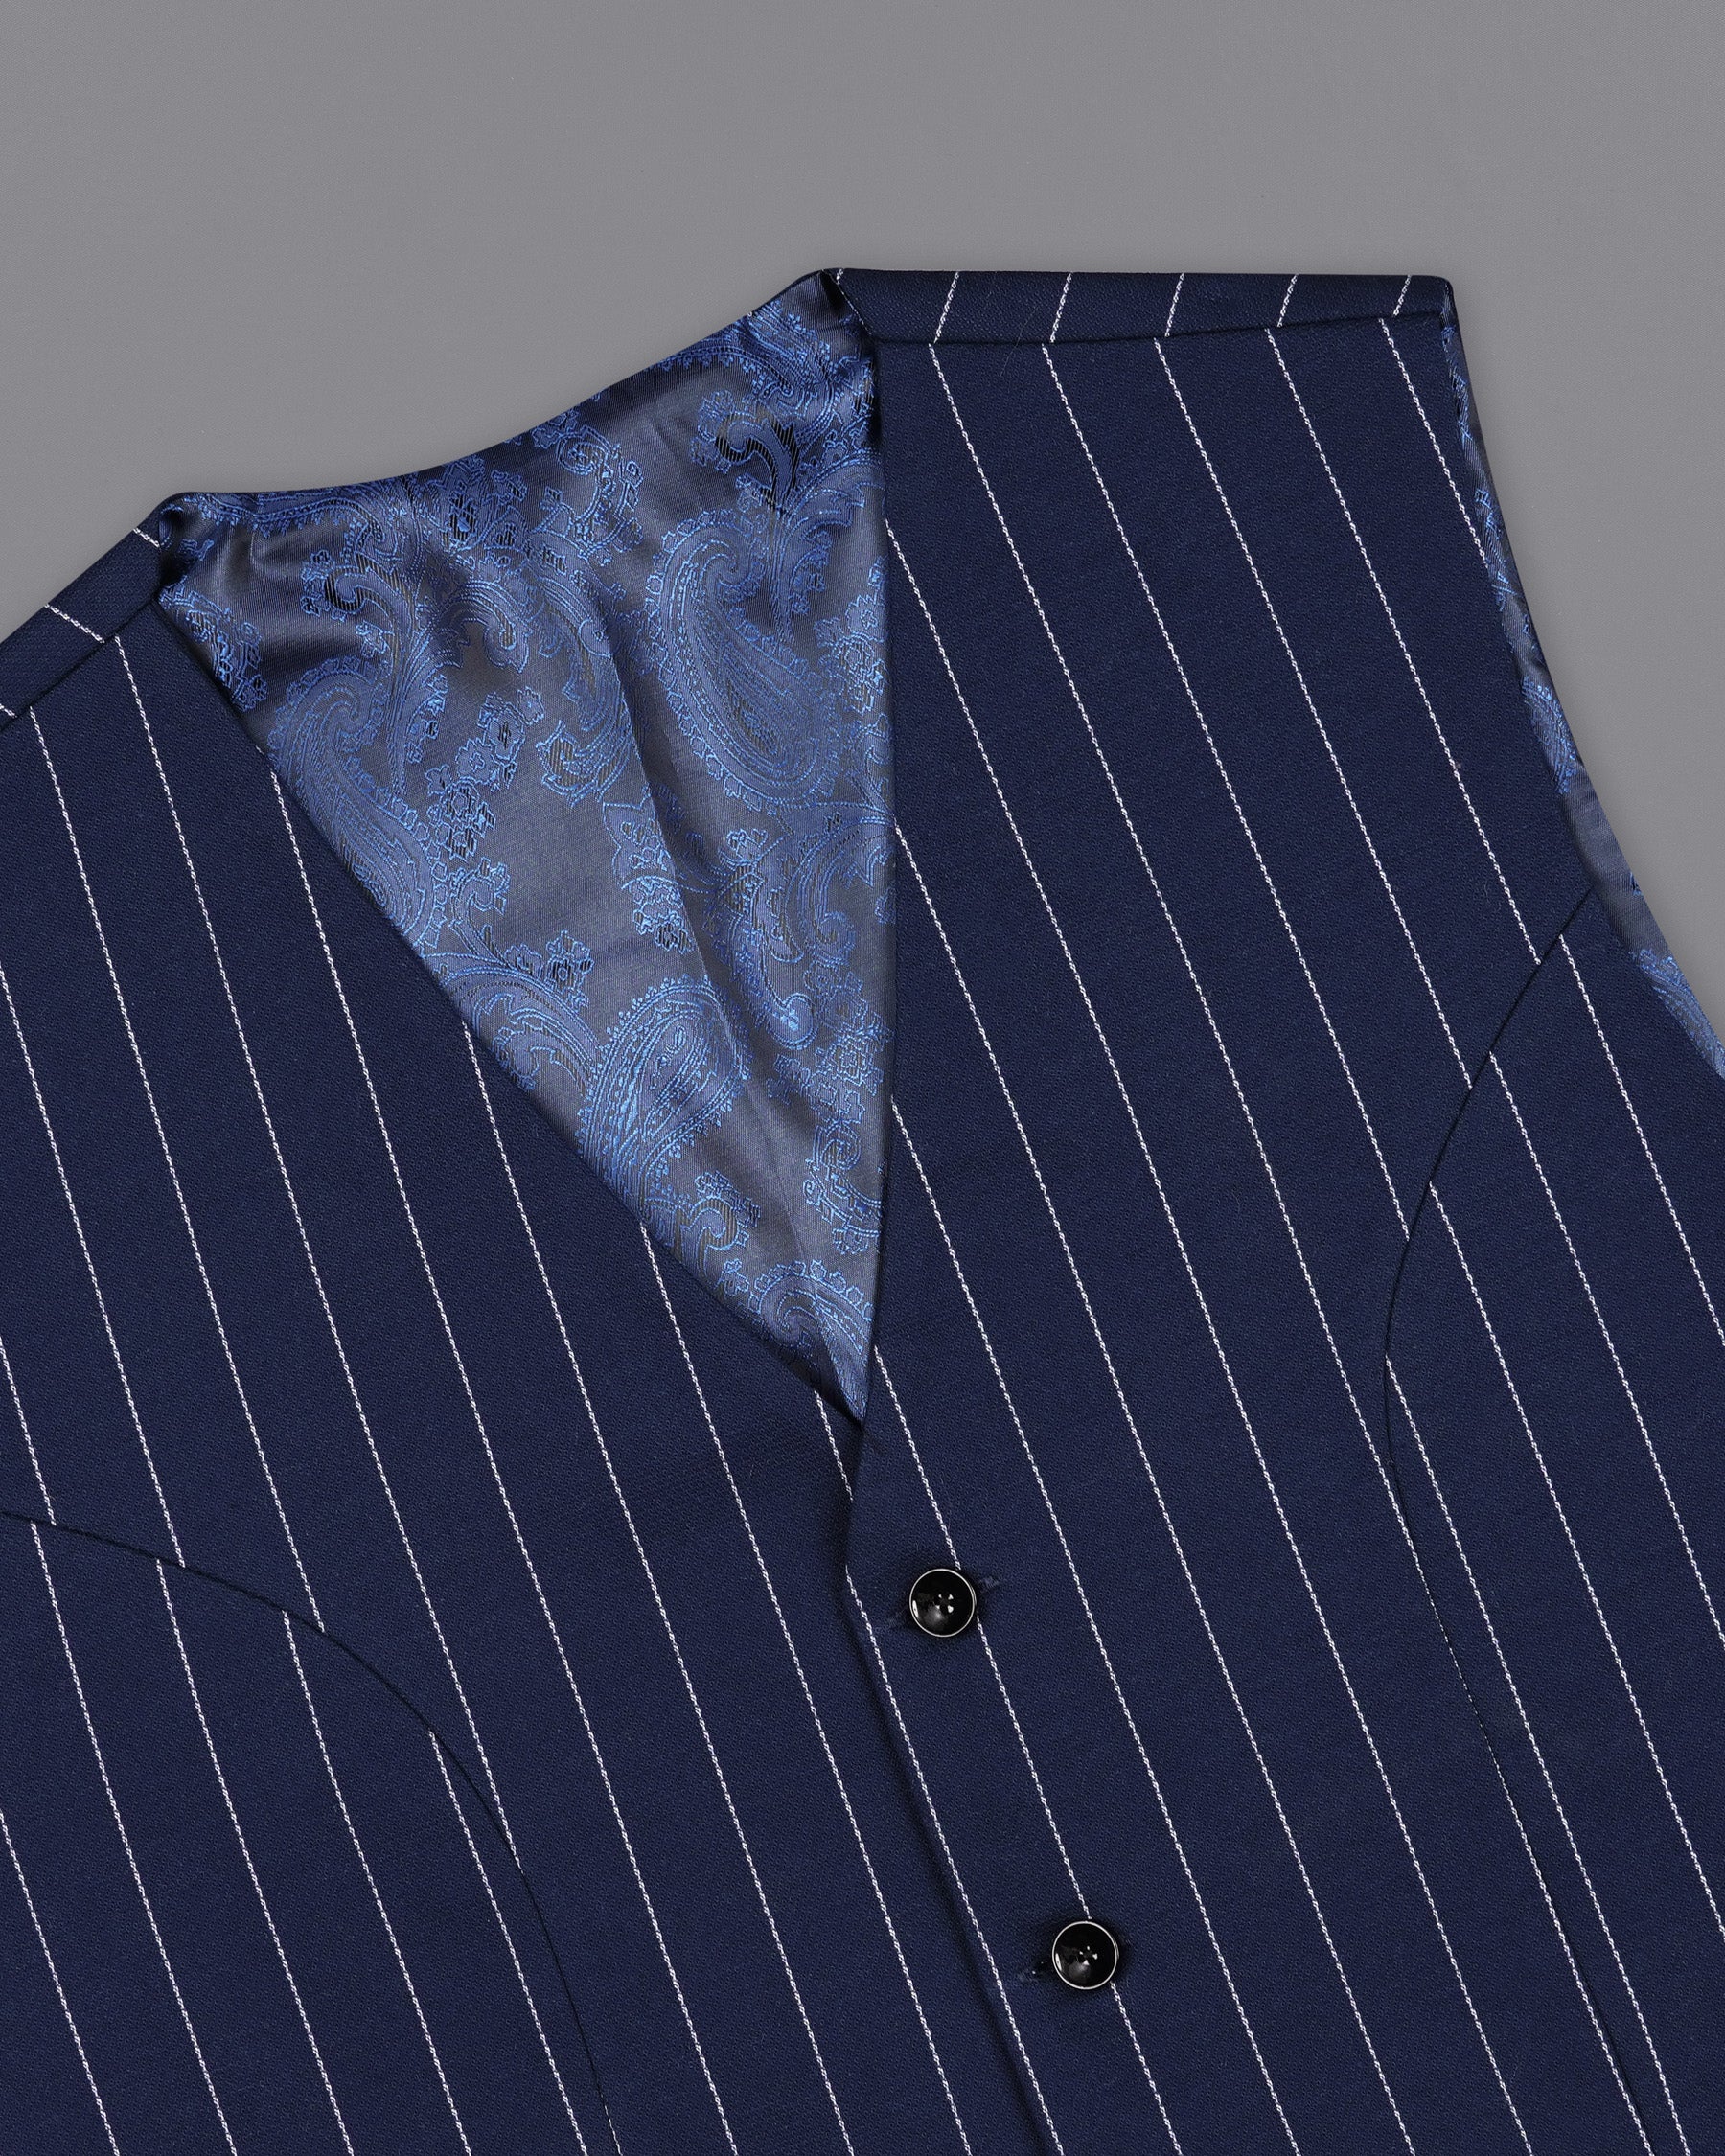 Zodiac Blue Striped Single Breasted Suit